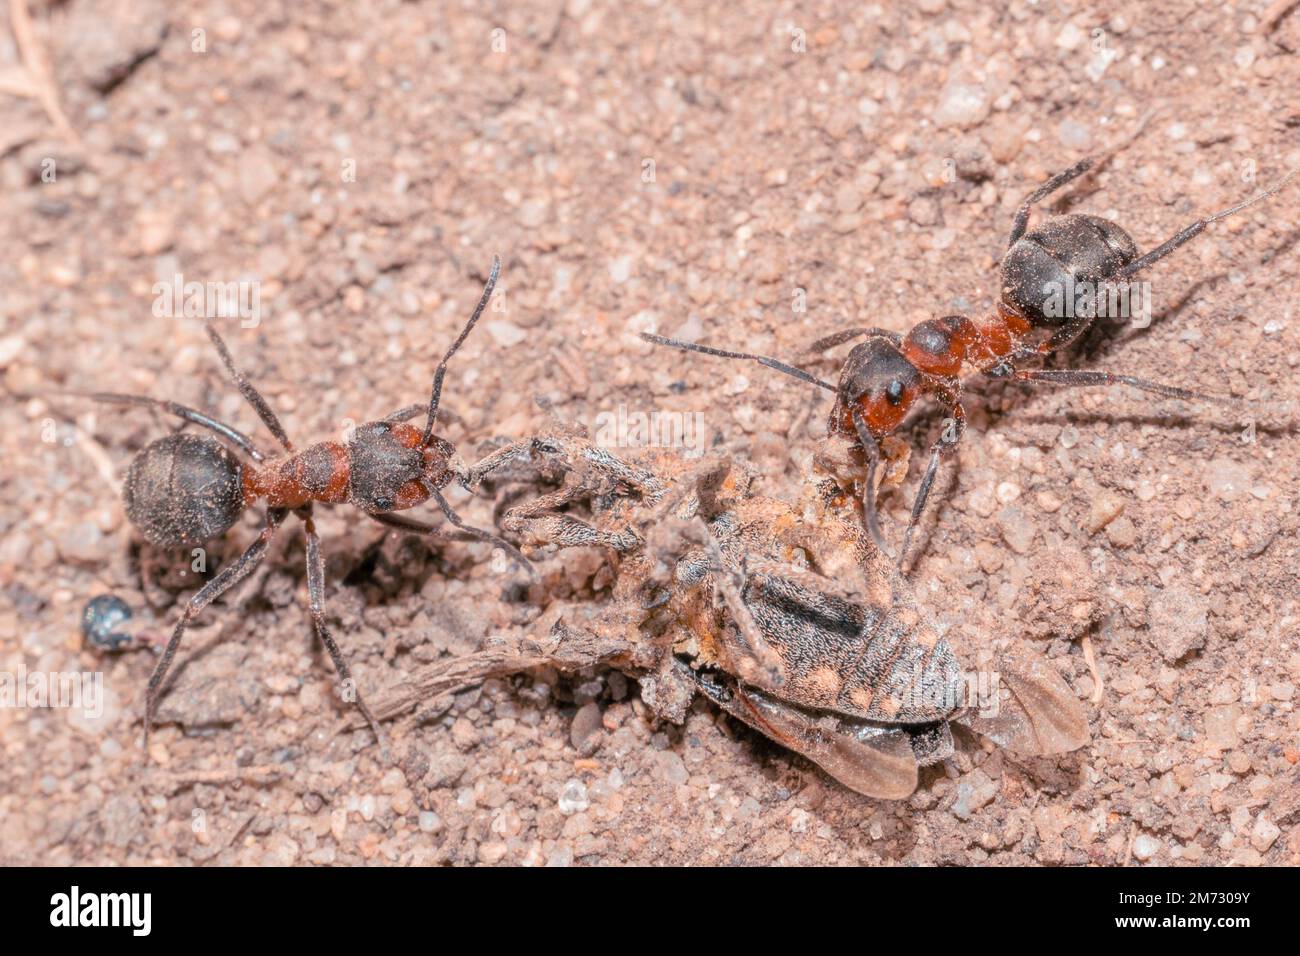 Two red wood ants Formica rufa carry their insect prey on the sandy ground Stock Photo